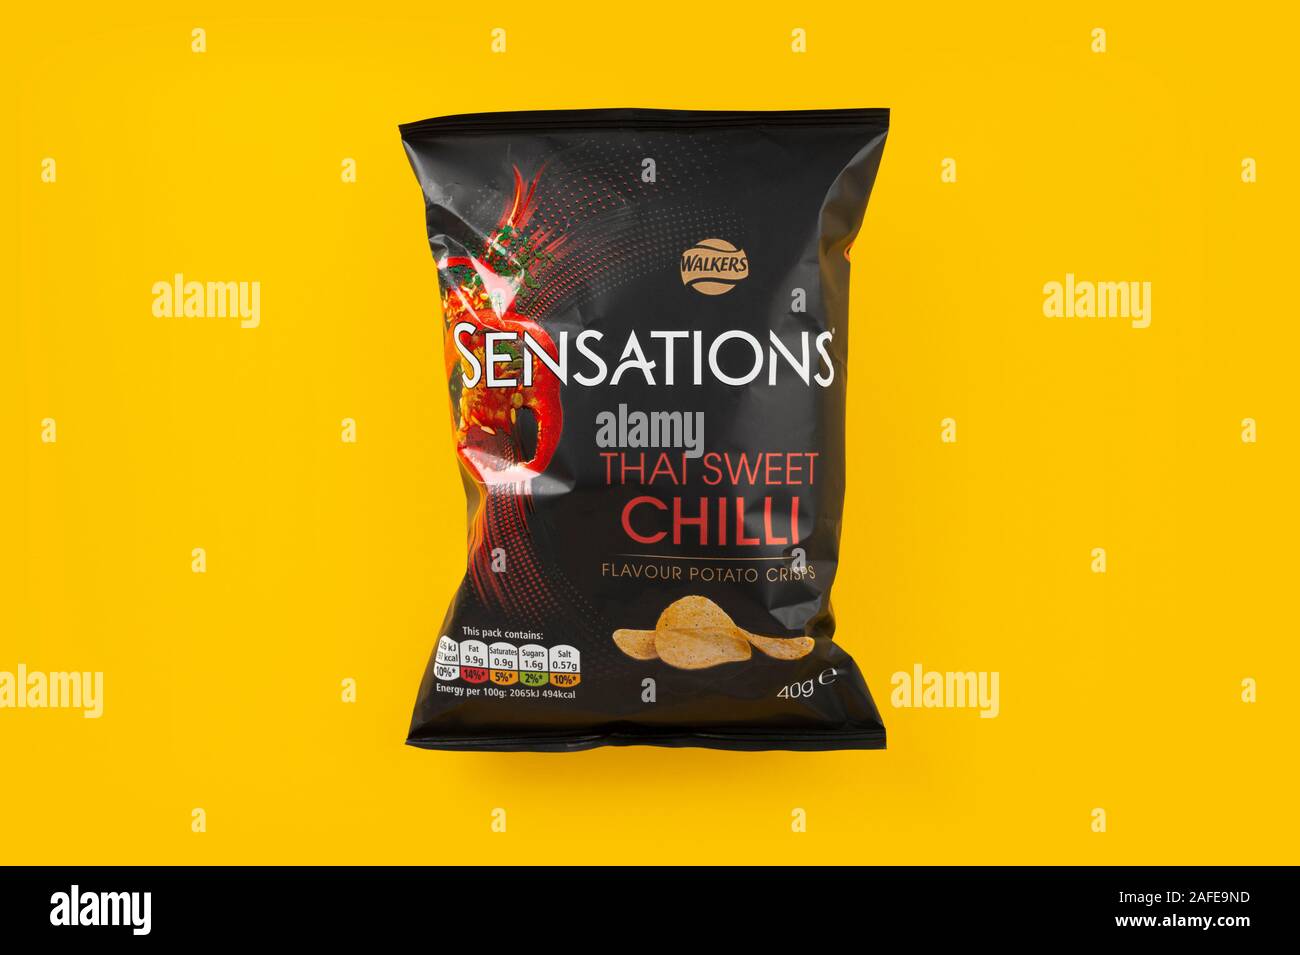 A packet of Walkers Sensations crisps shot on a yellow background. Stock Photo